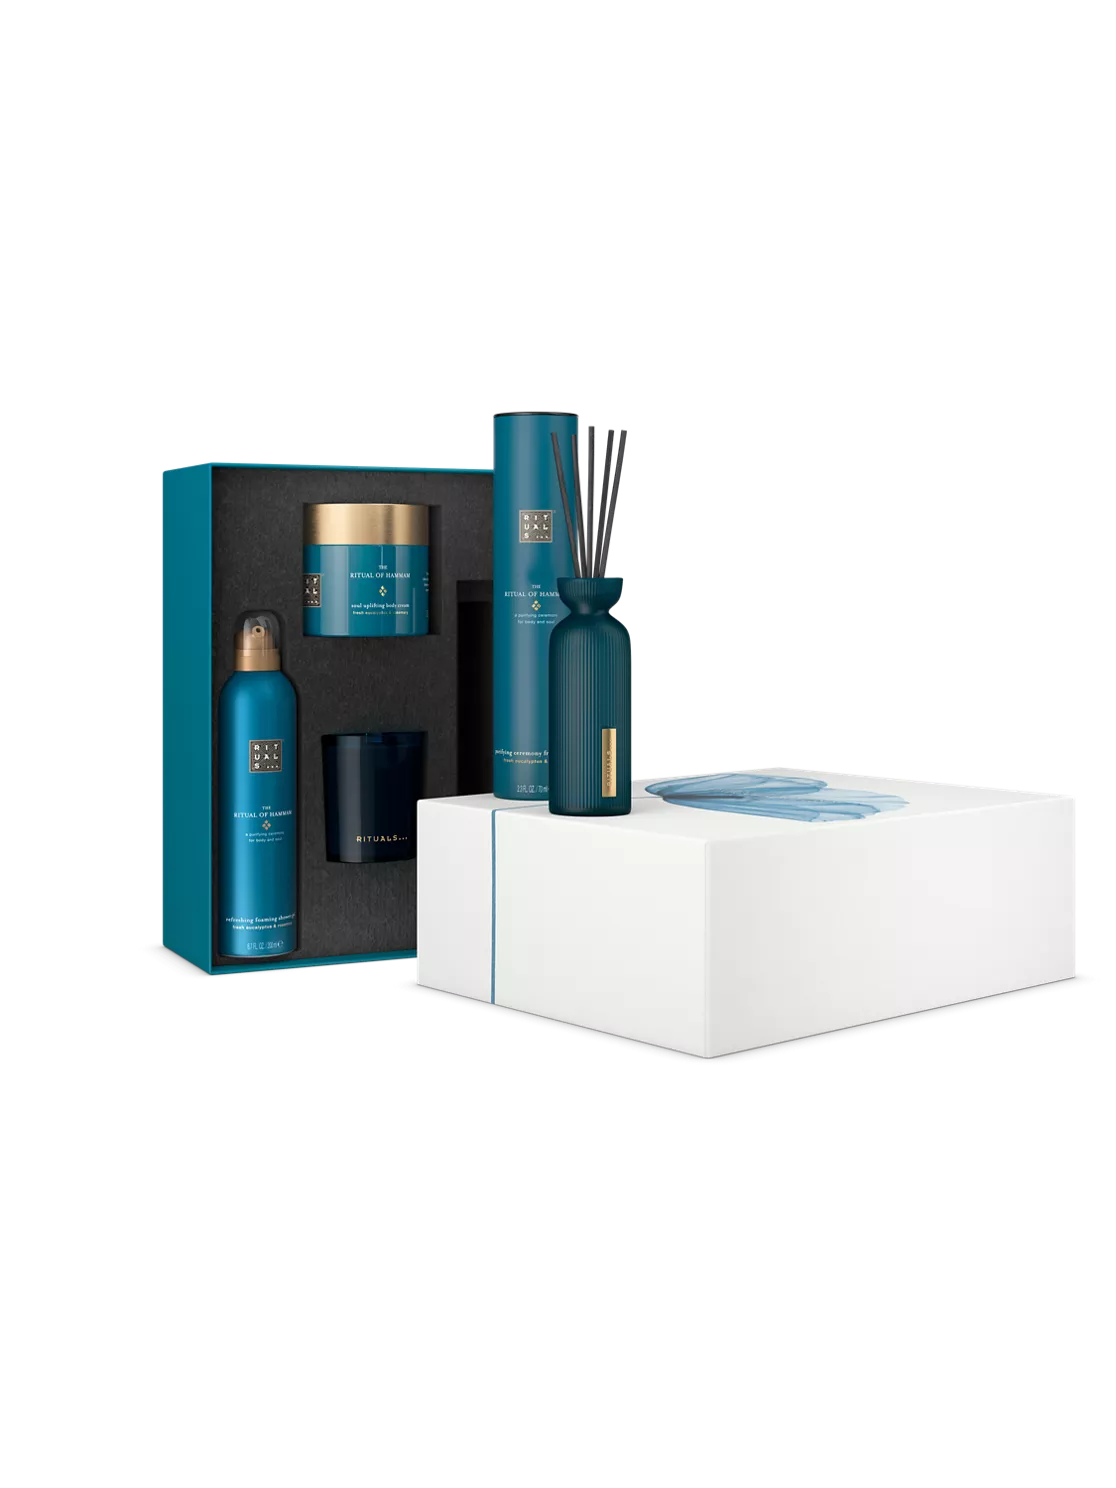 RITUALS Gift Sets  Hammam - Purifying Collection